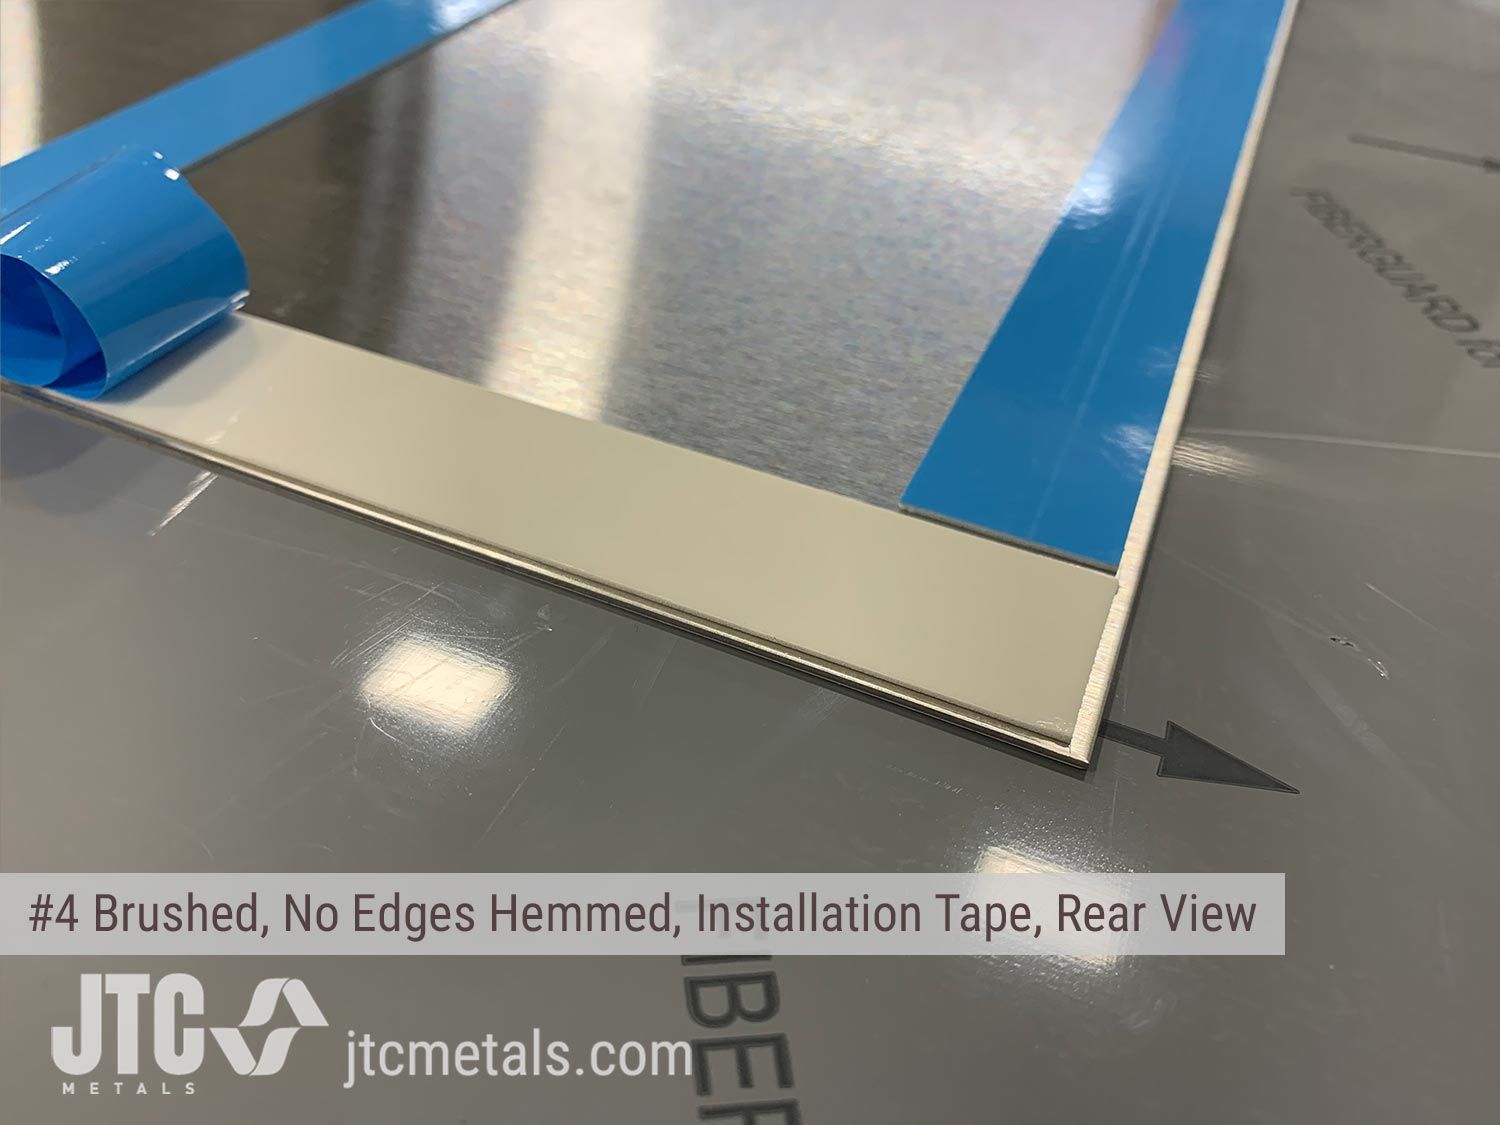 JTC Metals unhemmed panel with installation tape